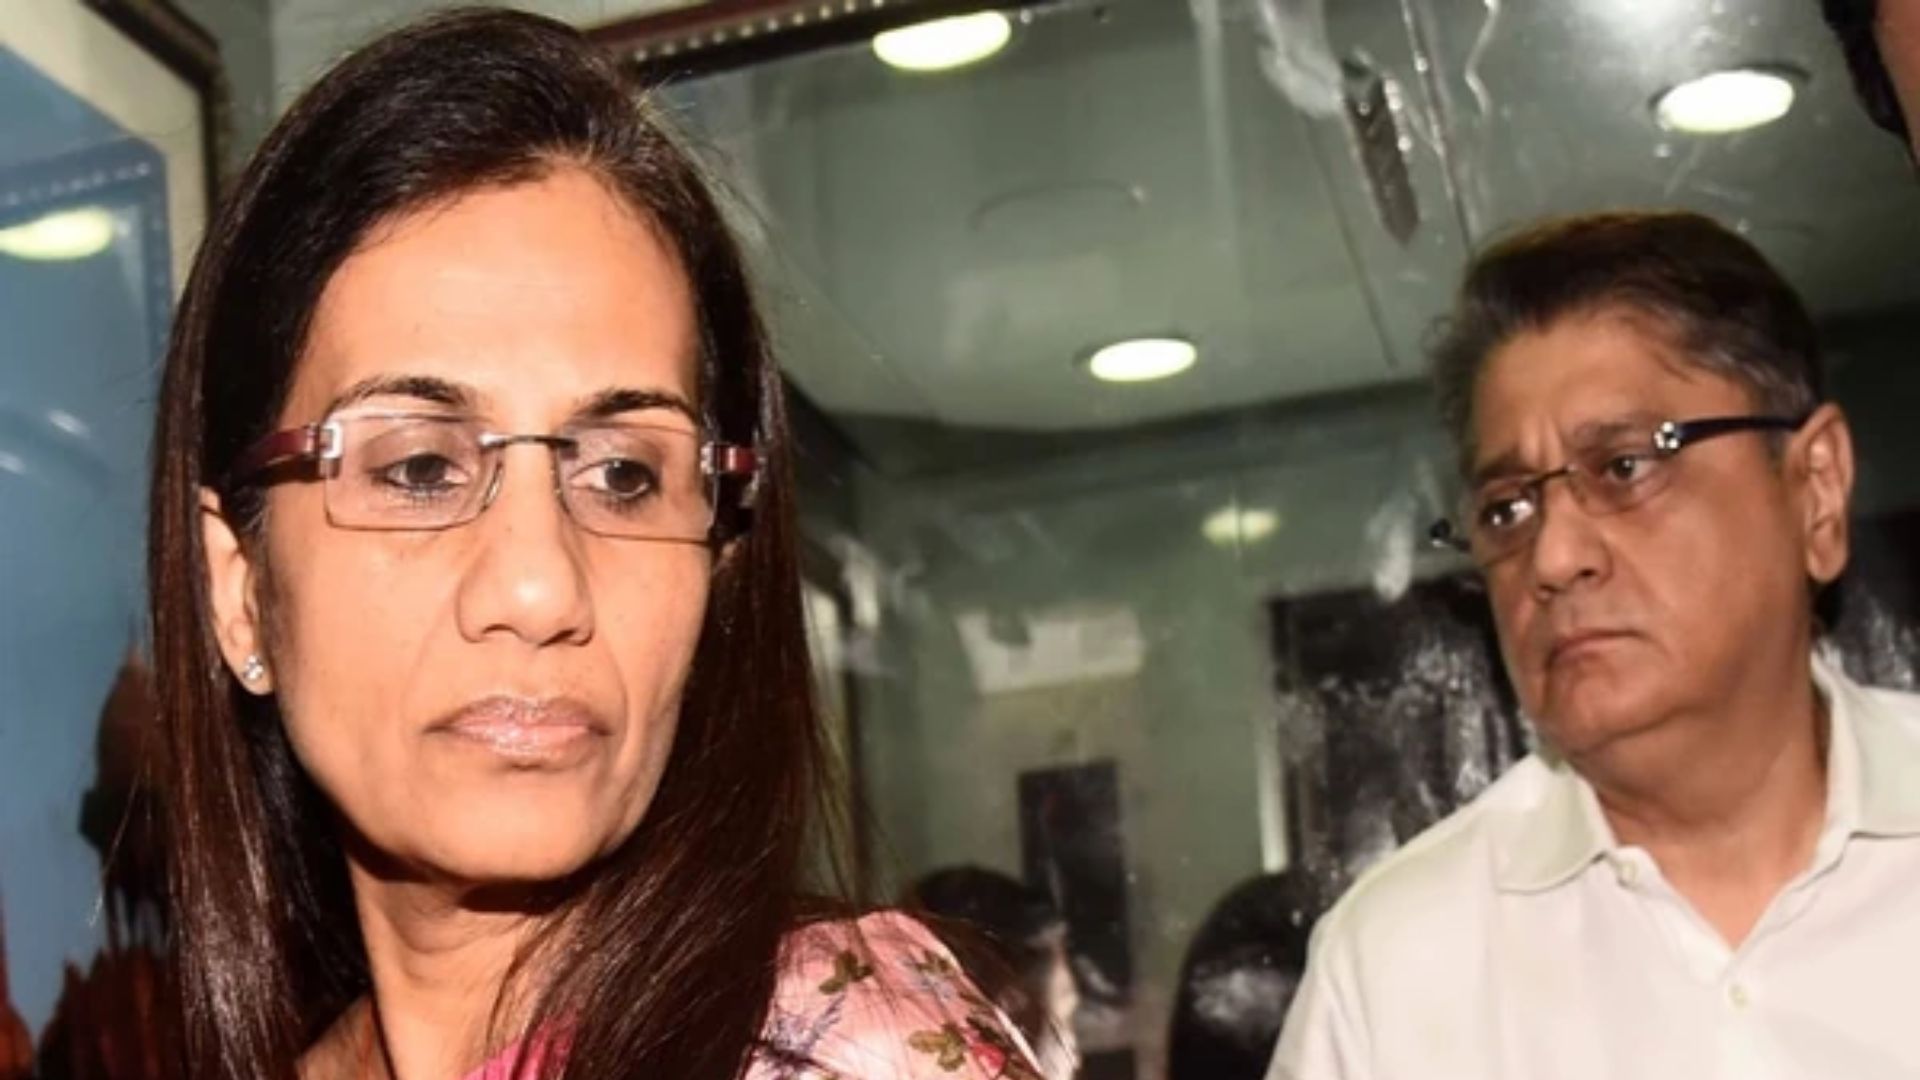 Chanda Kochhar, 10 others accused of ‘cheating’ private company